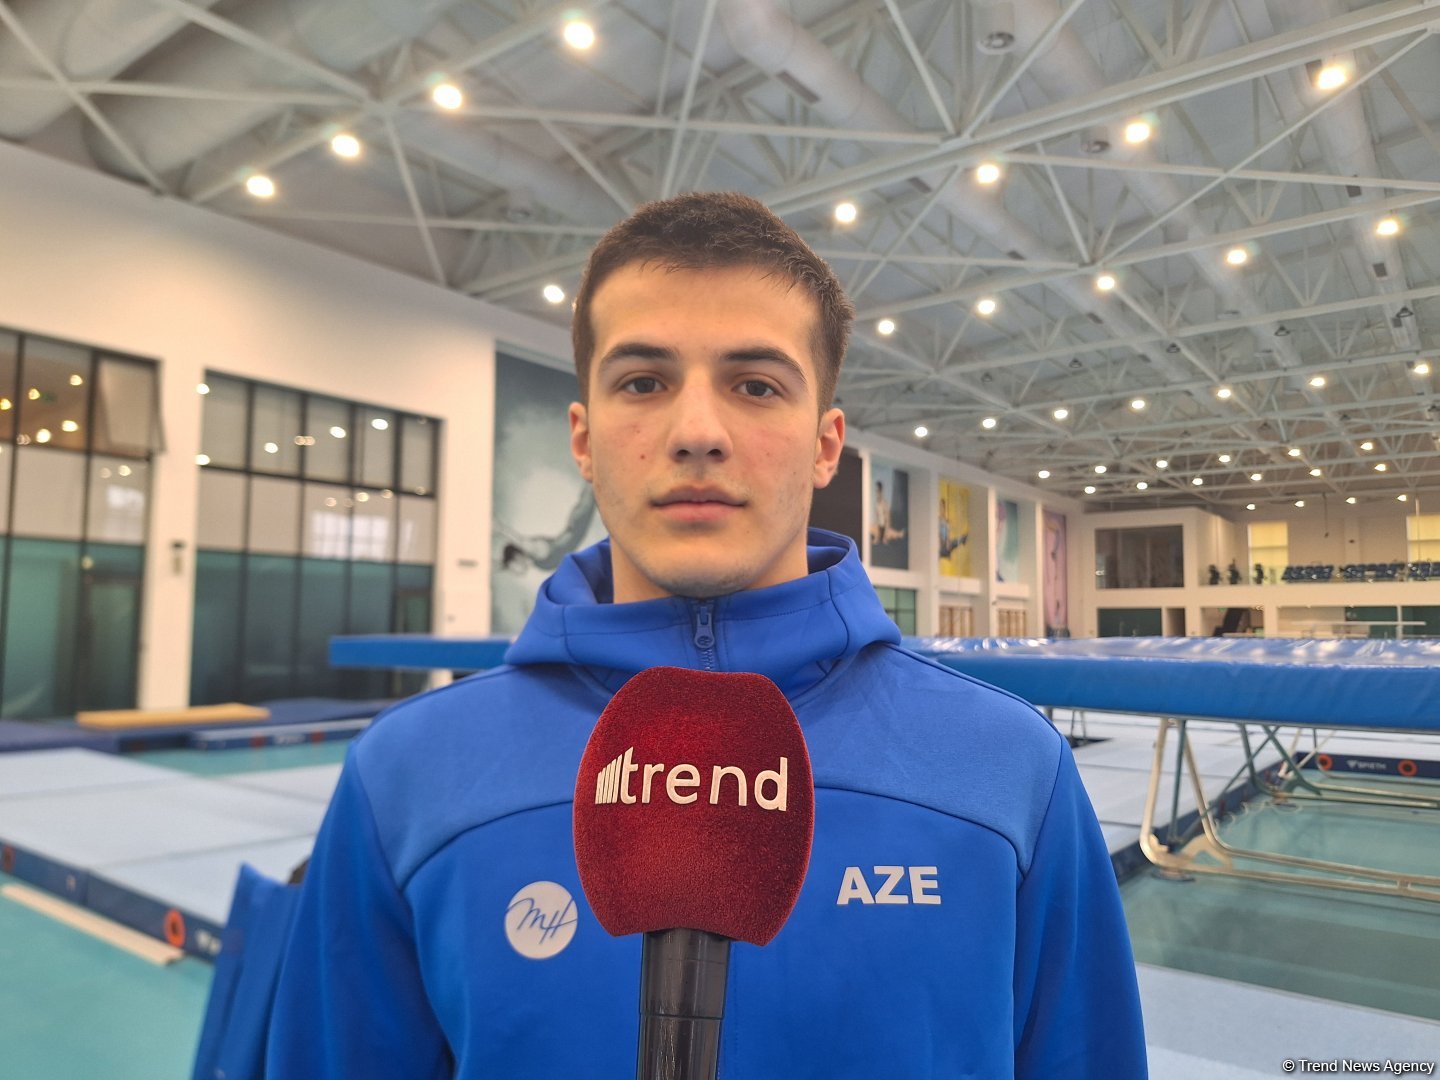 Azerbaijani squad hopes to win European title after winning World title